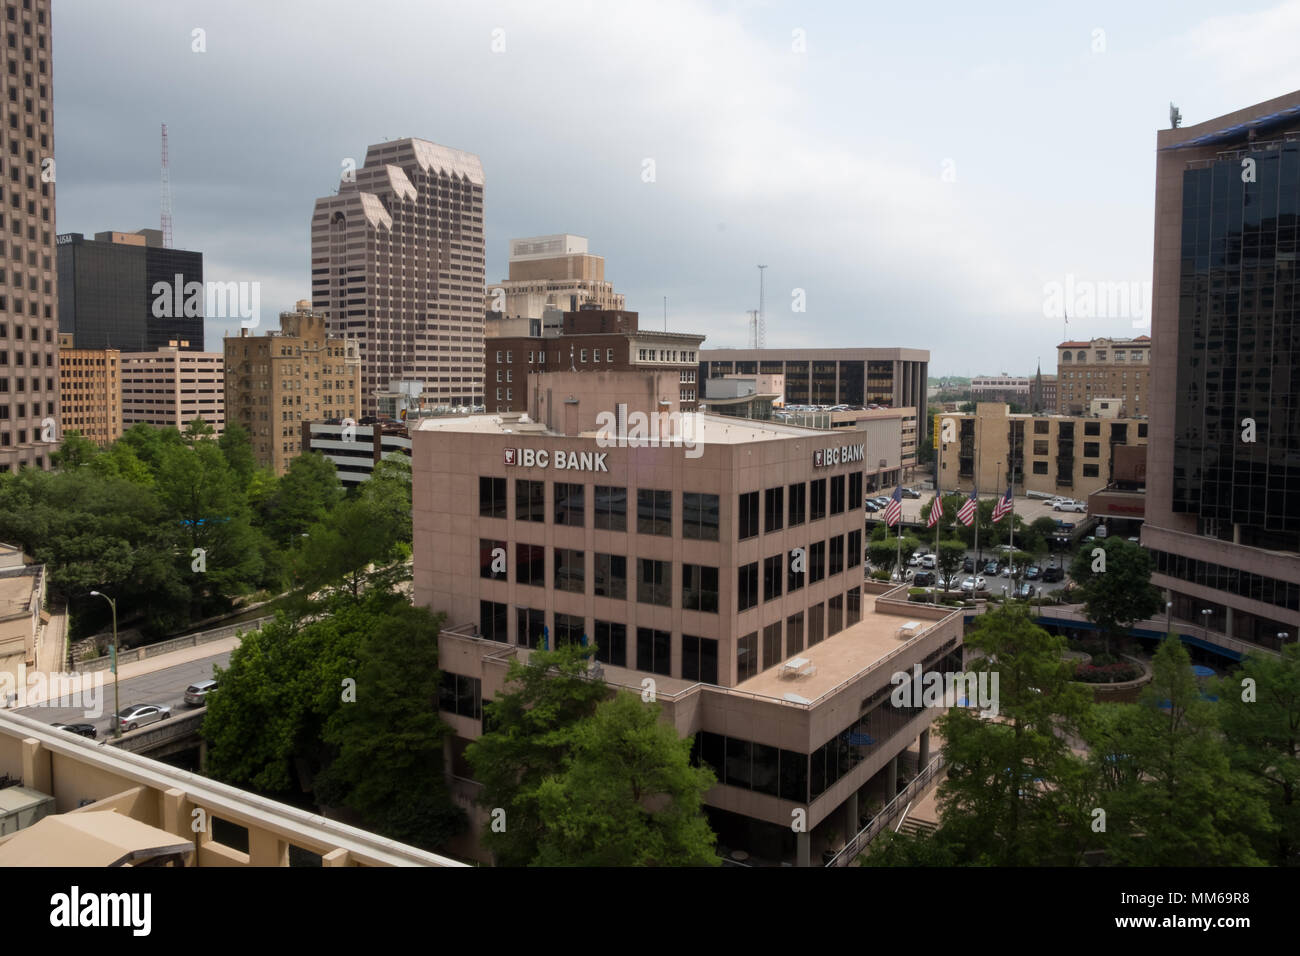 San Antonio, Texas - April 18, 2018: City skyline during the daytime shot from an elevated position. Stock Photo